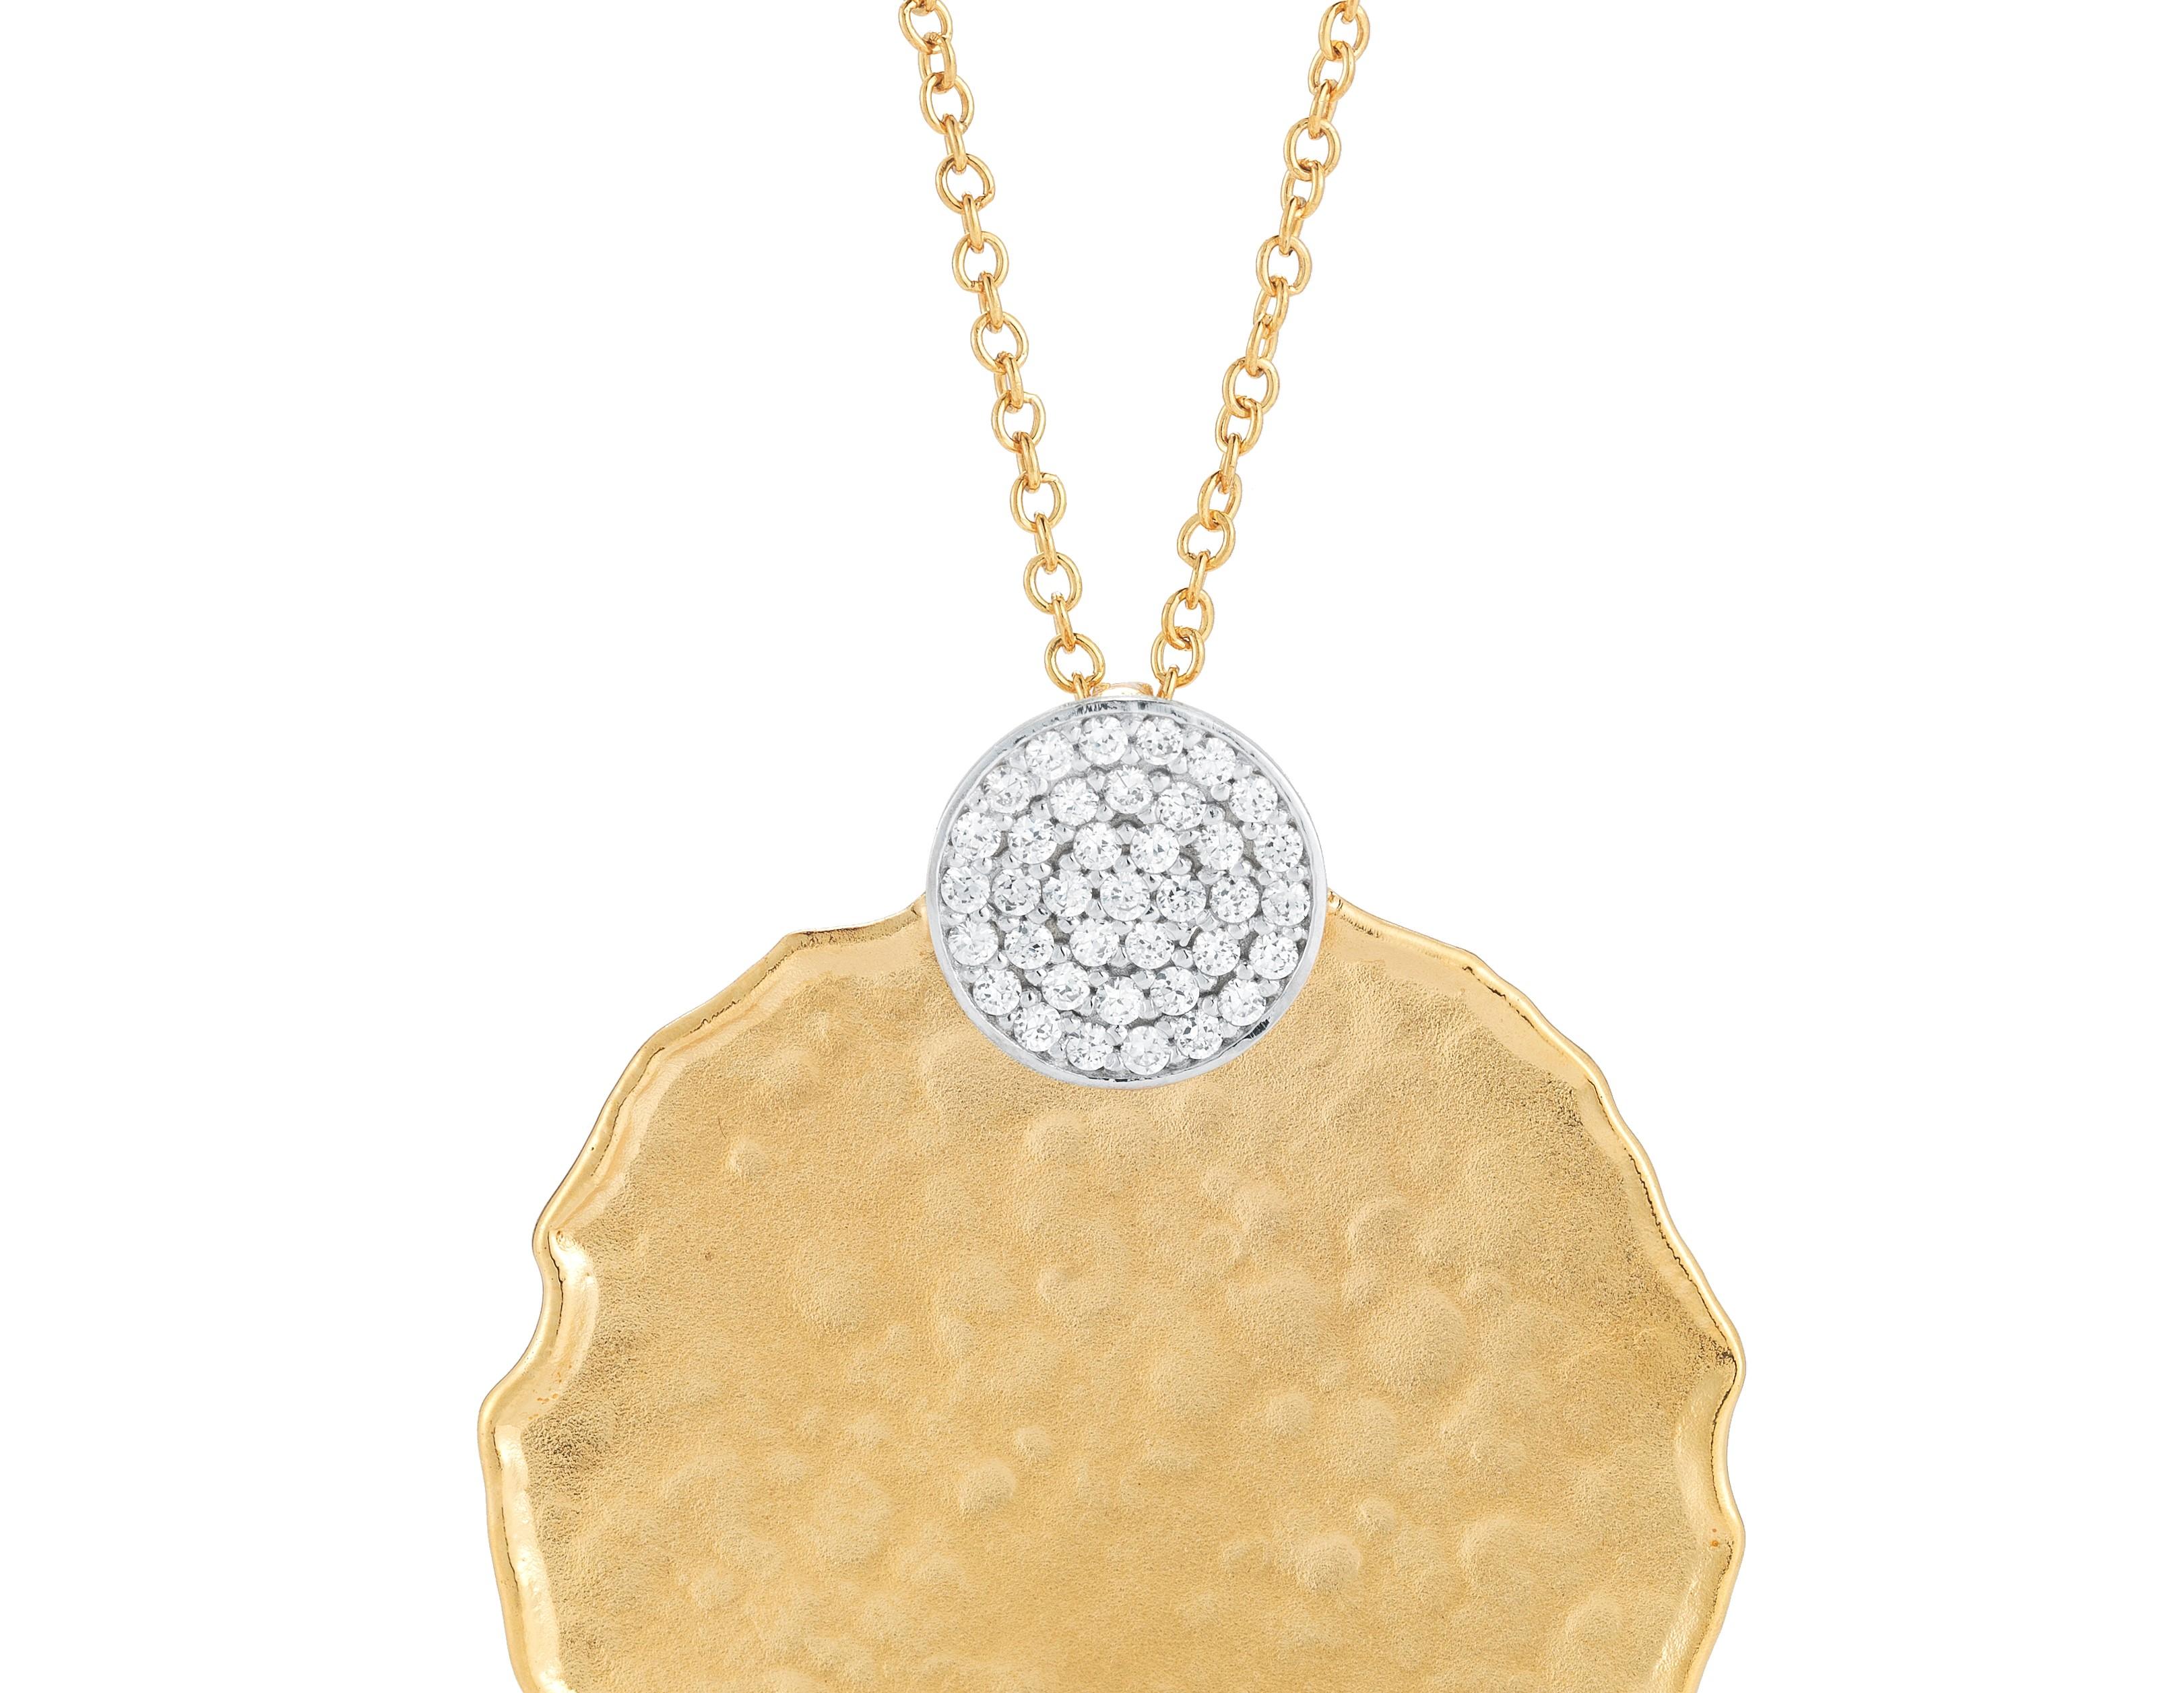 14 Karat Yellow Gold Hand-Crafted 30mm Matte and Hammer-Finished Scallop-Edged Pendant, Accented with 0.12 Carats of a Pave Set Diamond Circle, Sliding on a 16